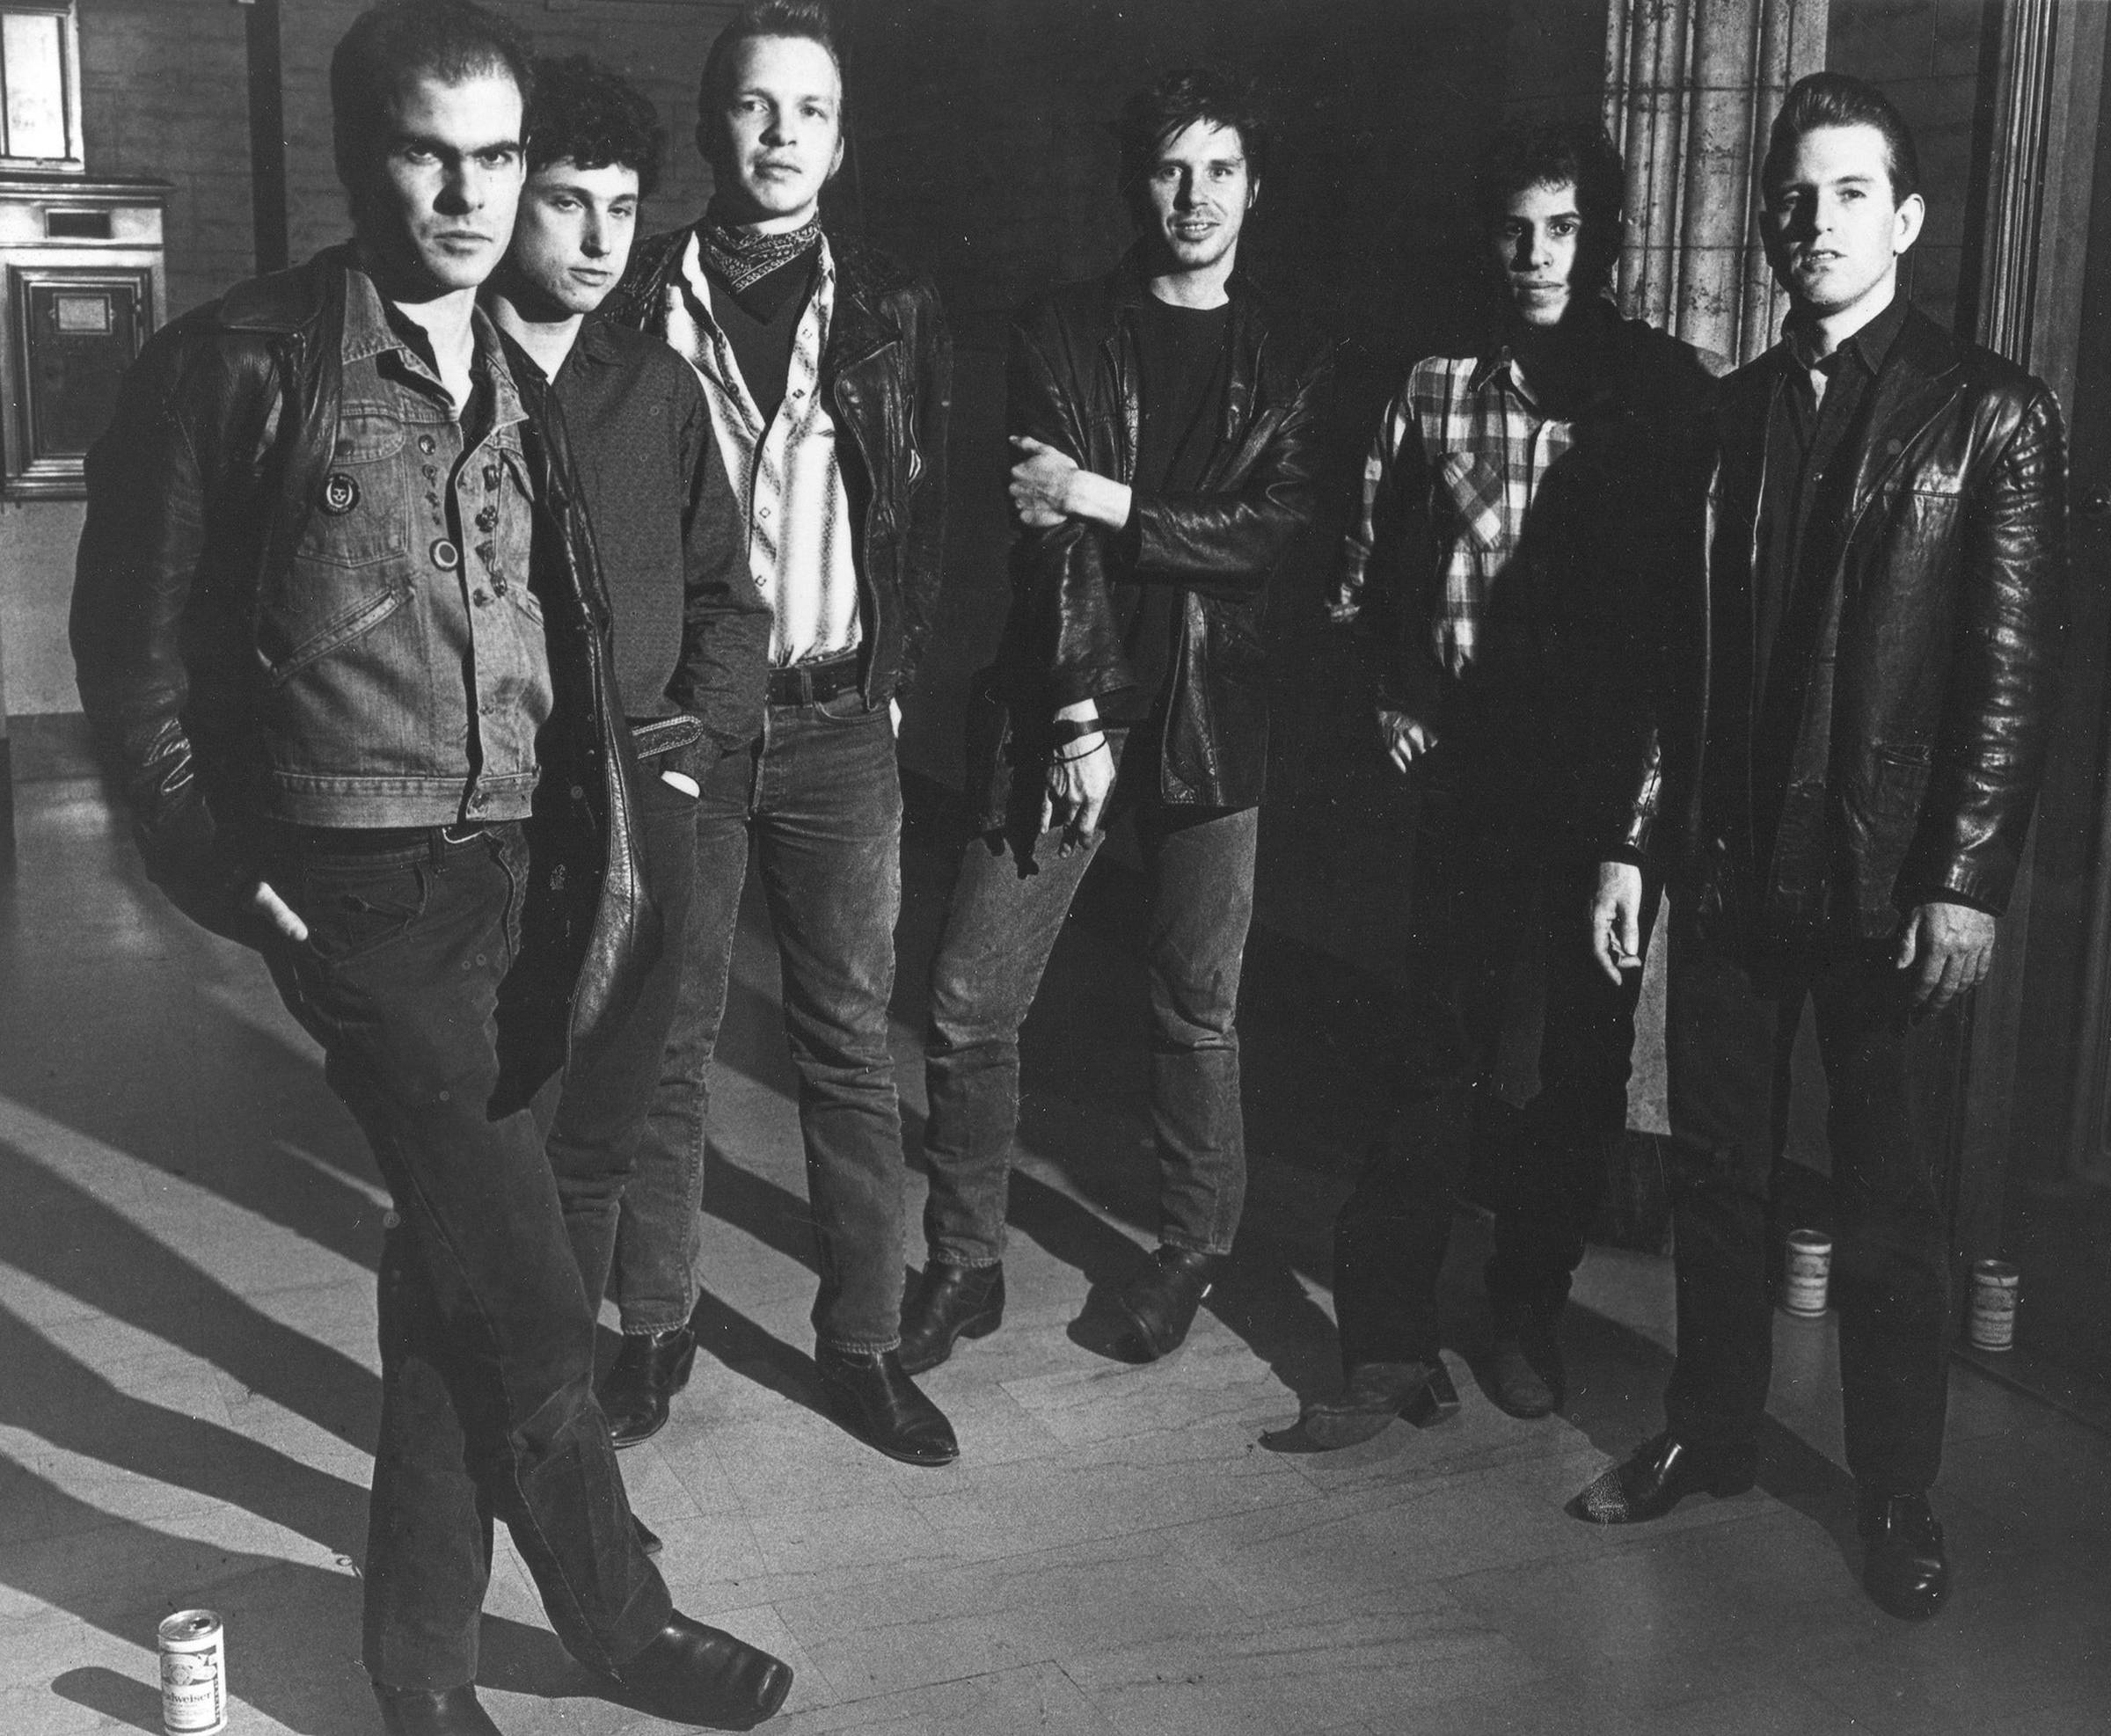 The Flesh Eaters at the Rickshaw Theatre, Vancouver